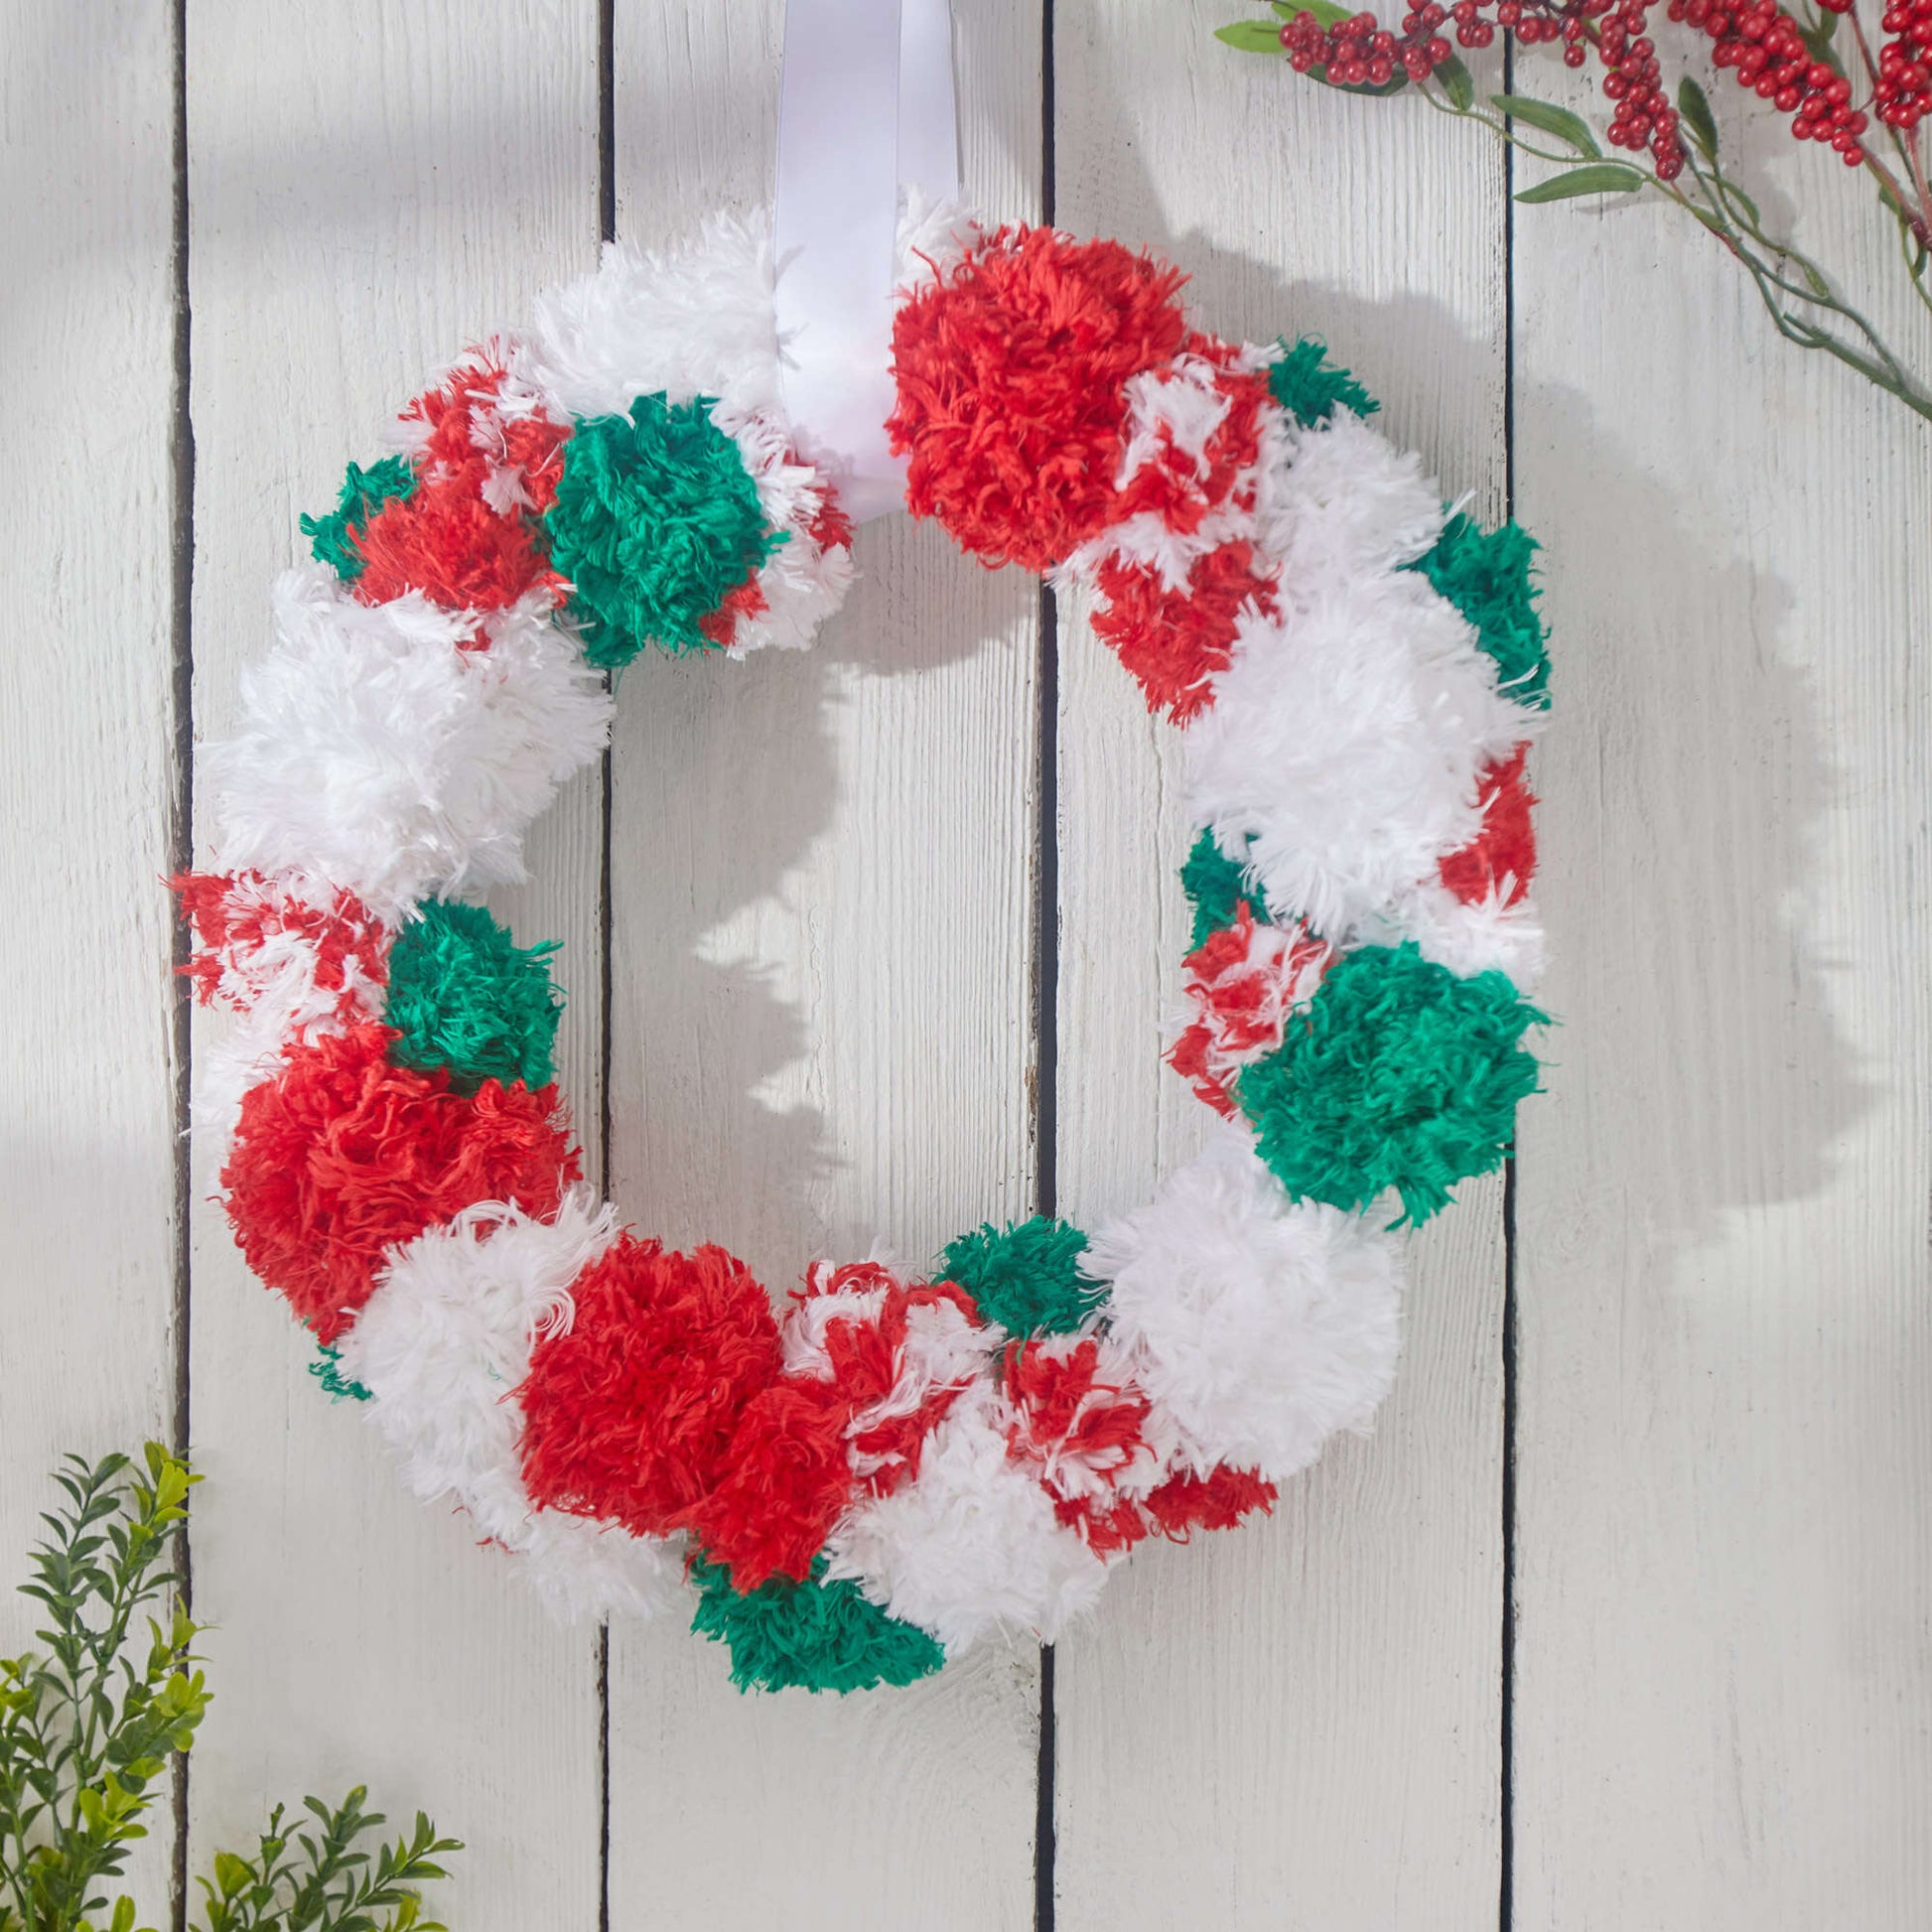 Free Red Heart Crafty Christmas Wreath Pattern